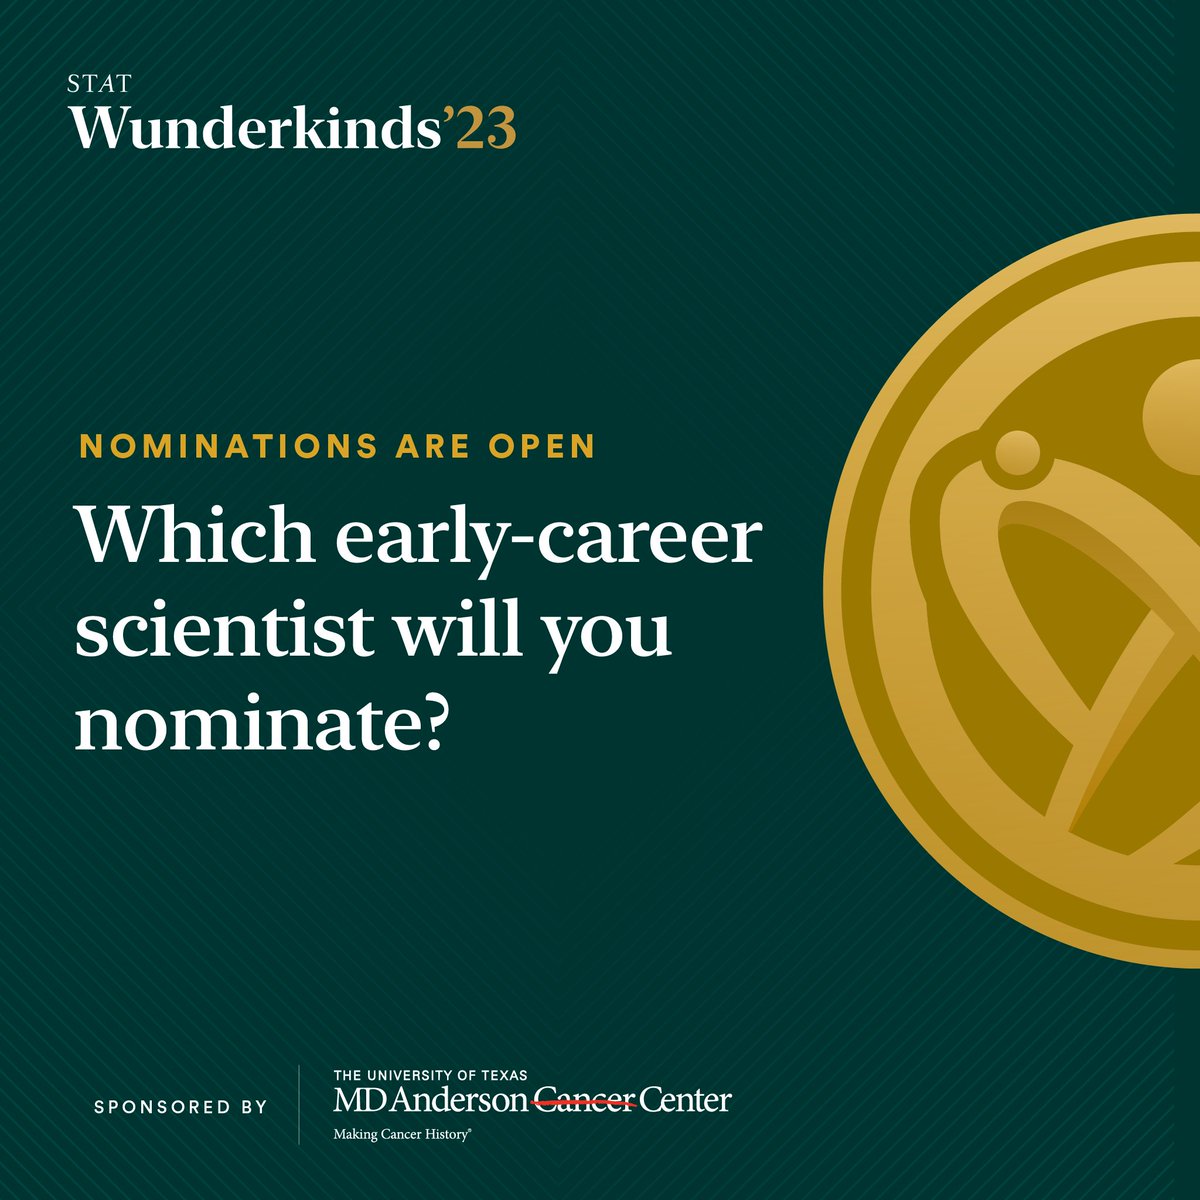 The deadline to nominate someone for #STATWunderkinds is in one week! Send your nominations here: statnews.com/wunderkinds-no…